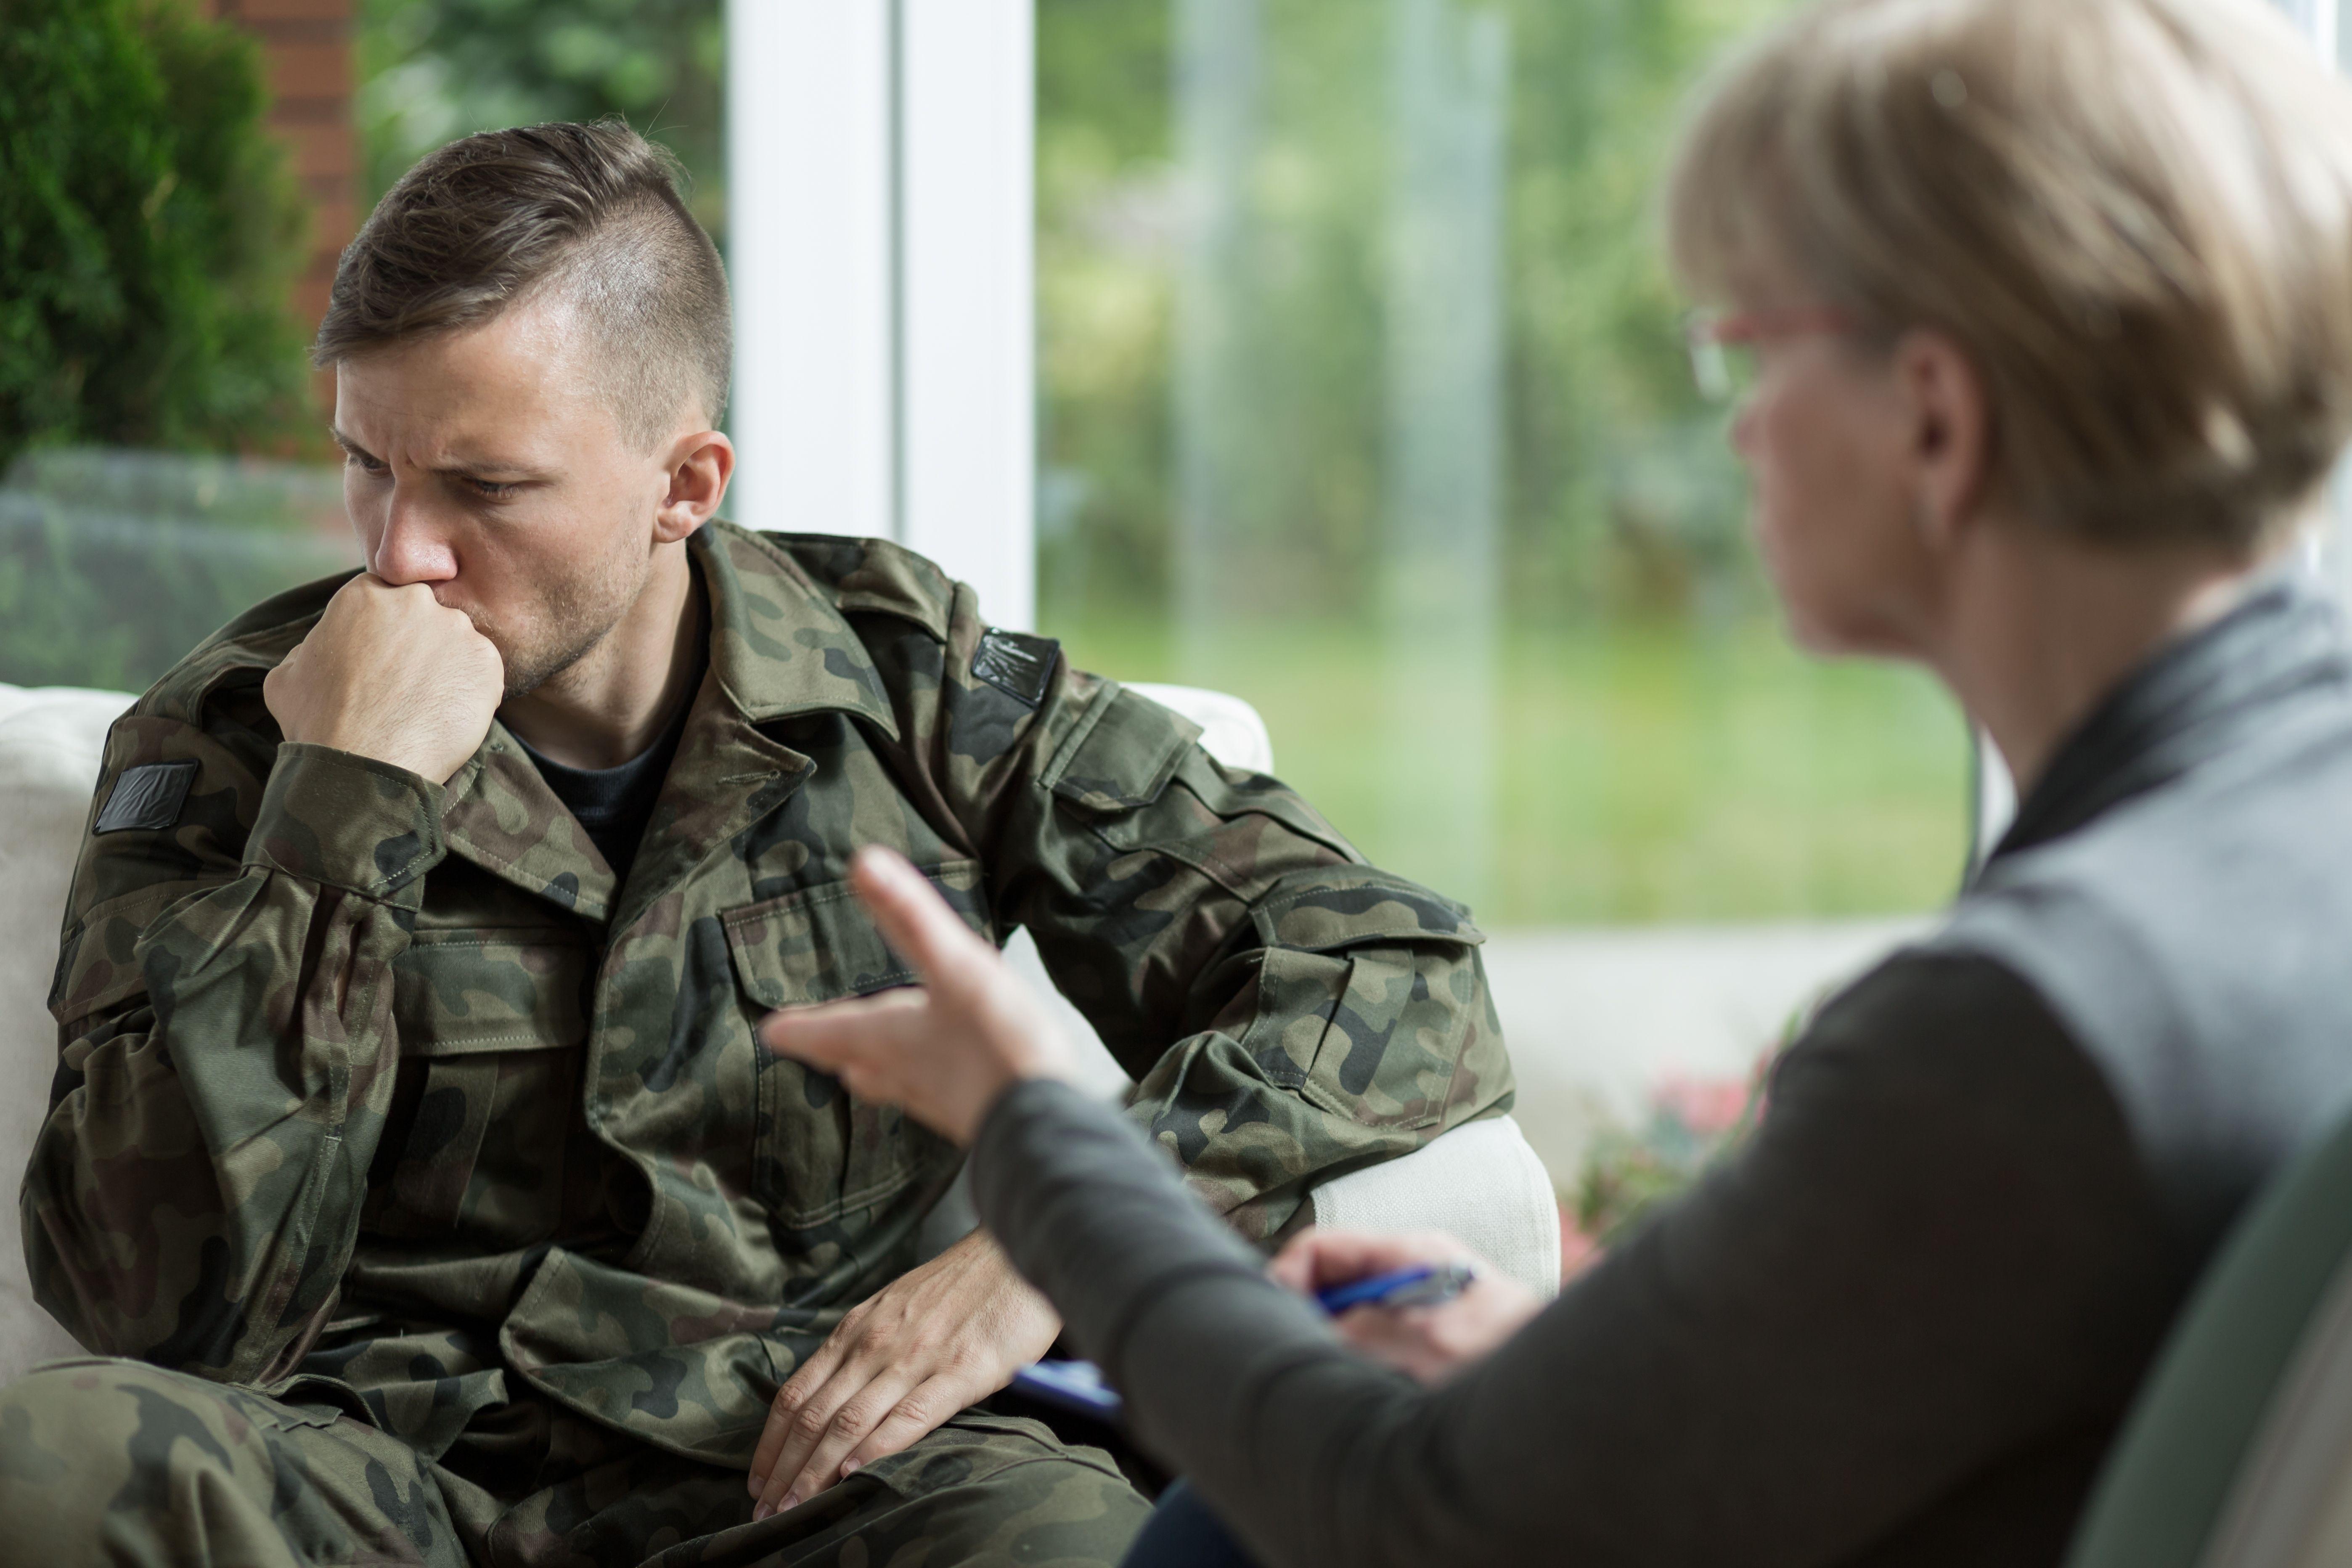 Soldier undergoing military intake interview with female recruiter